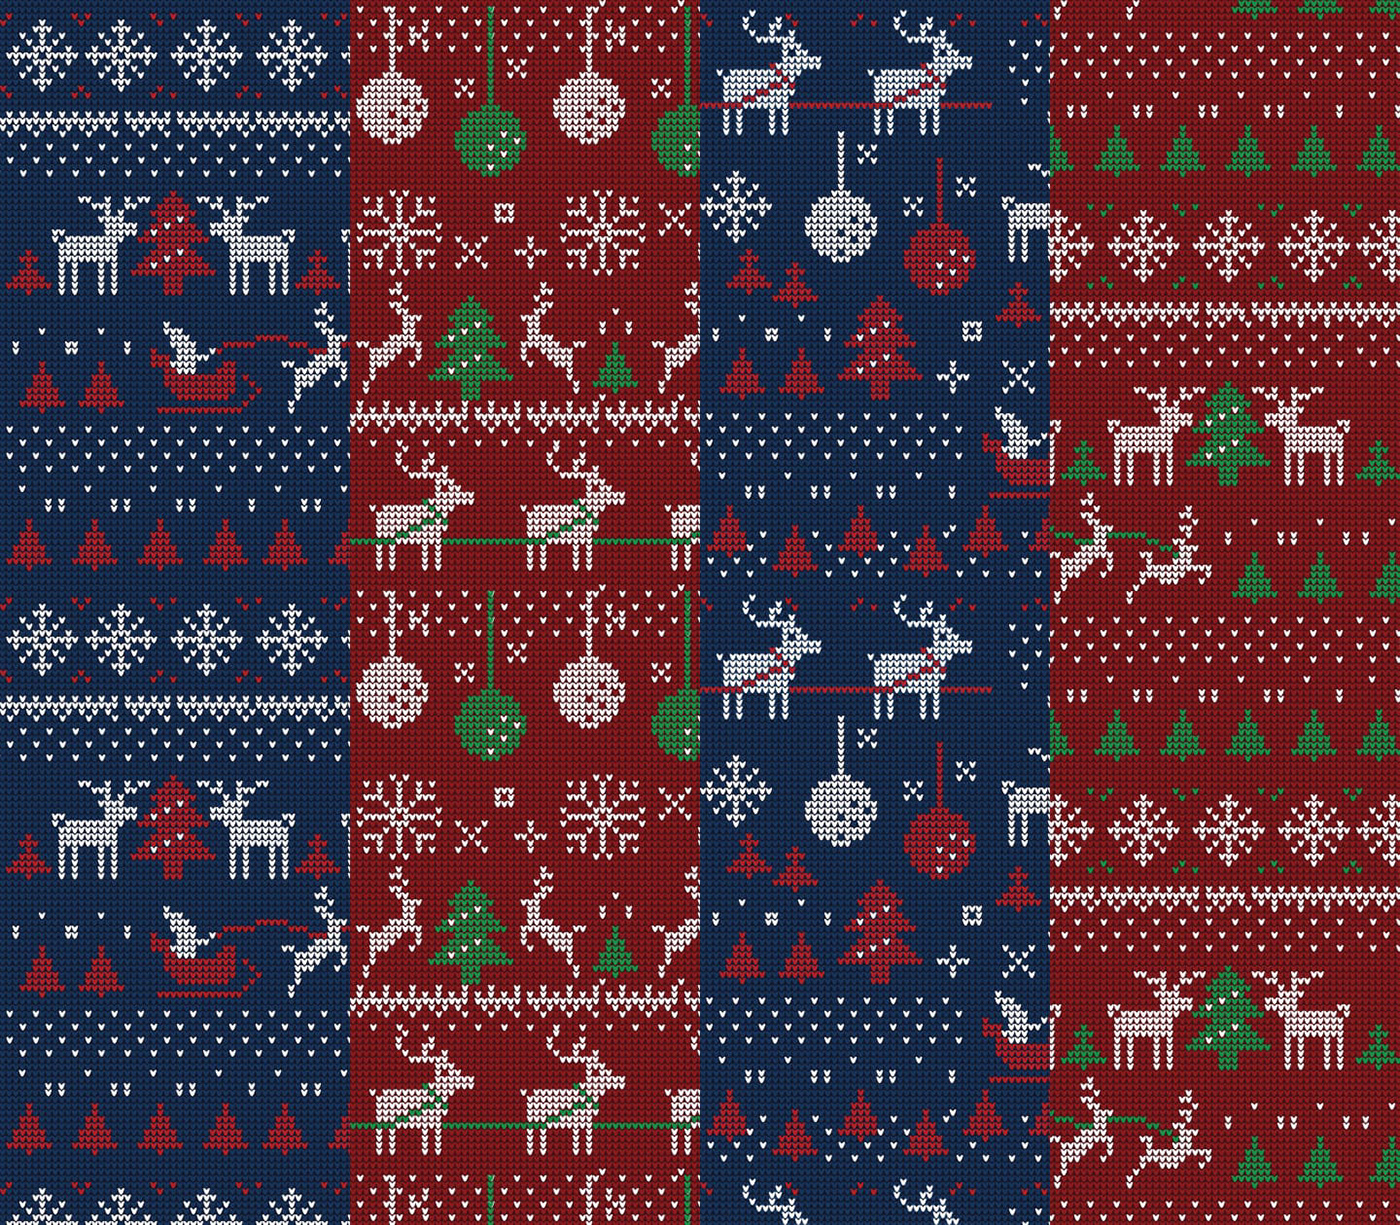 A selection of free patterns featuring classic "Ugly Sweater" des...